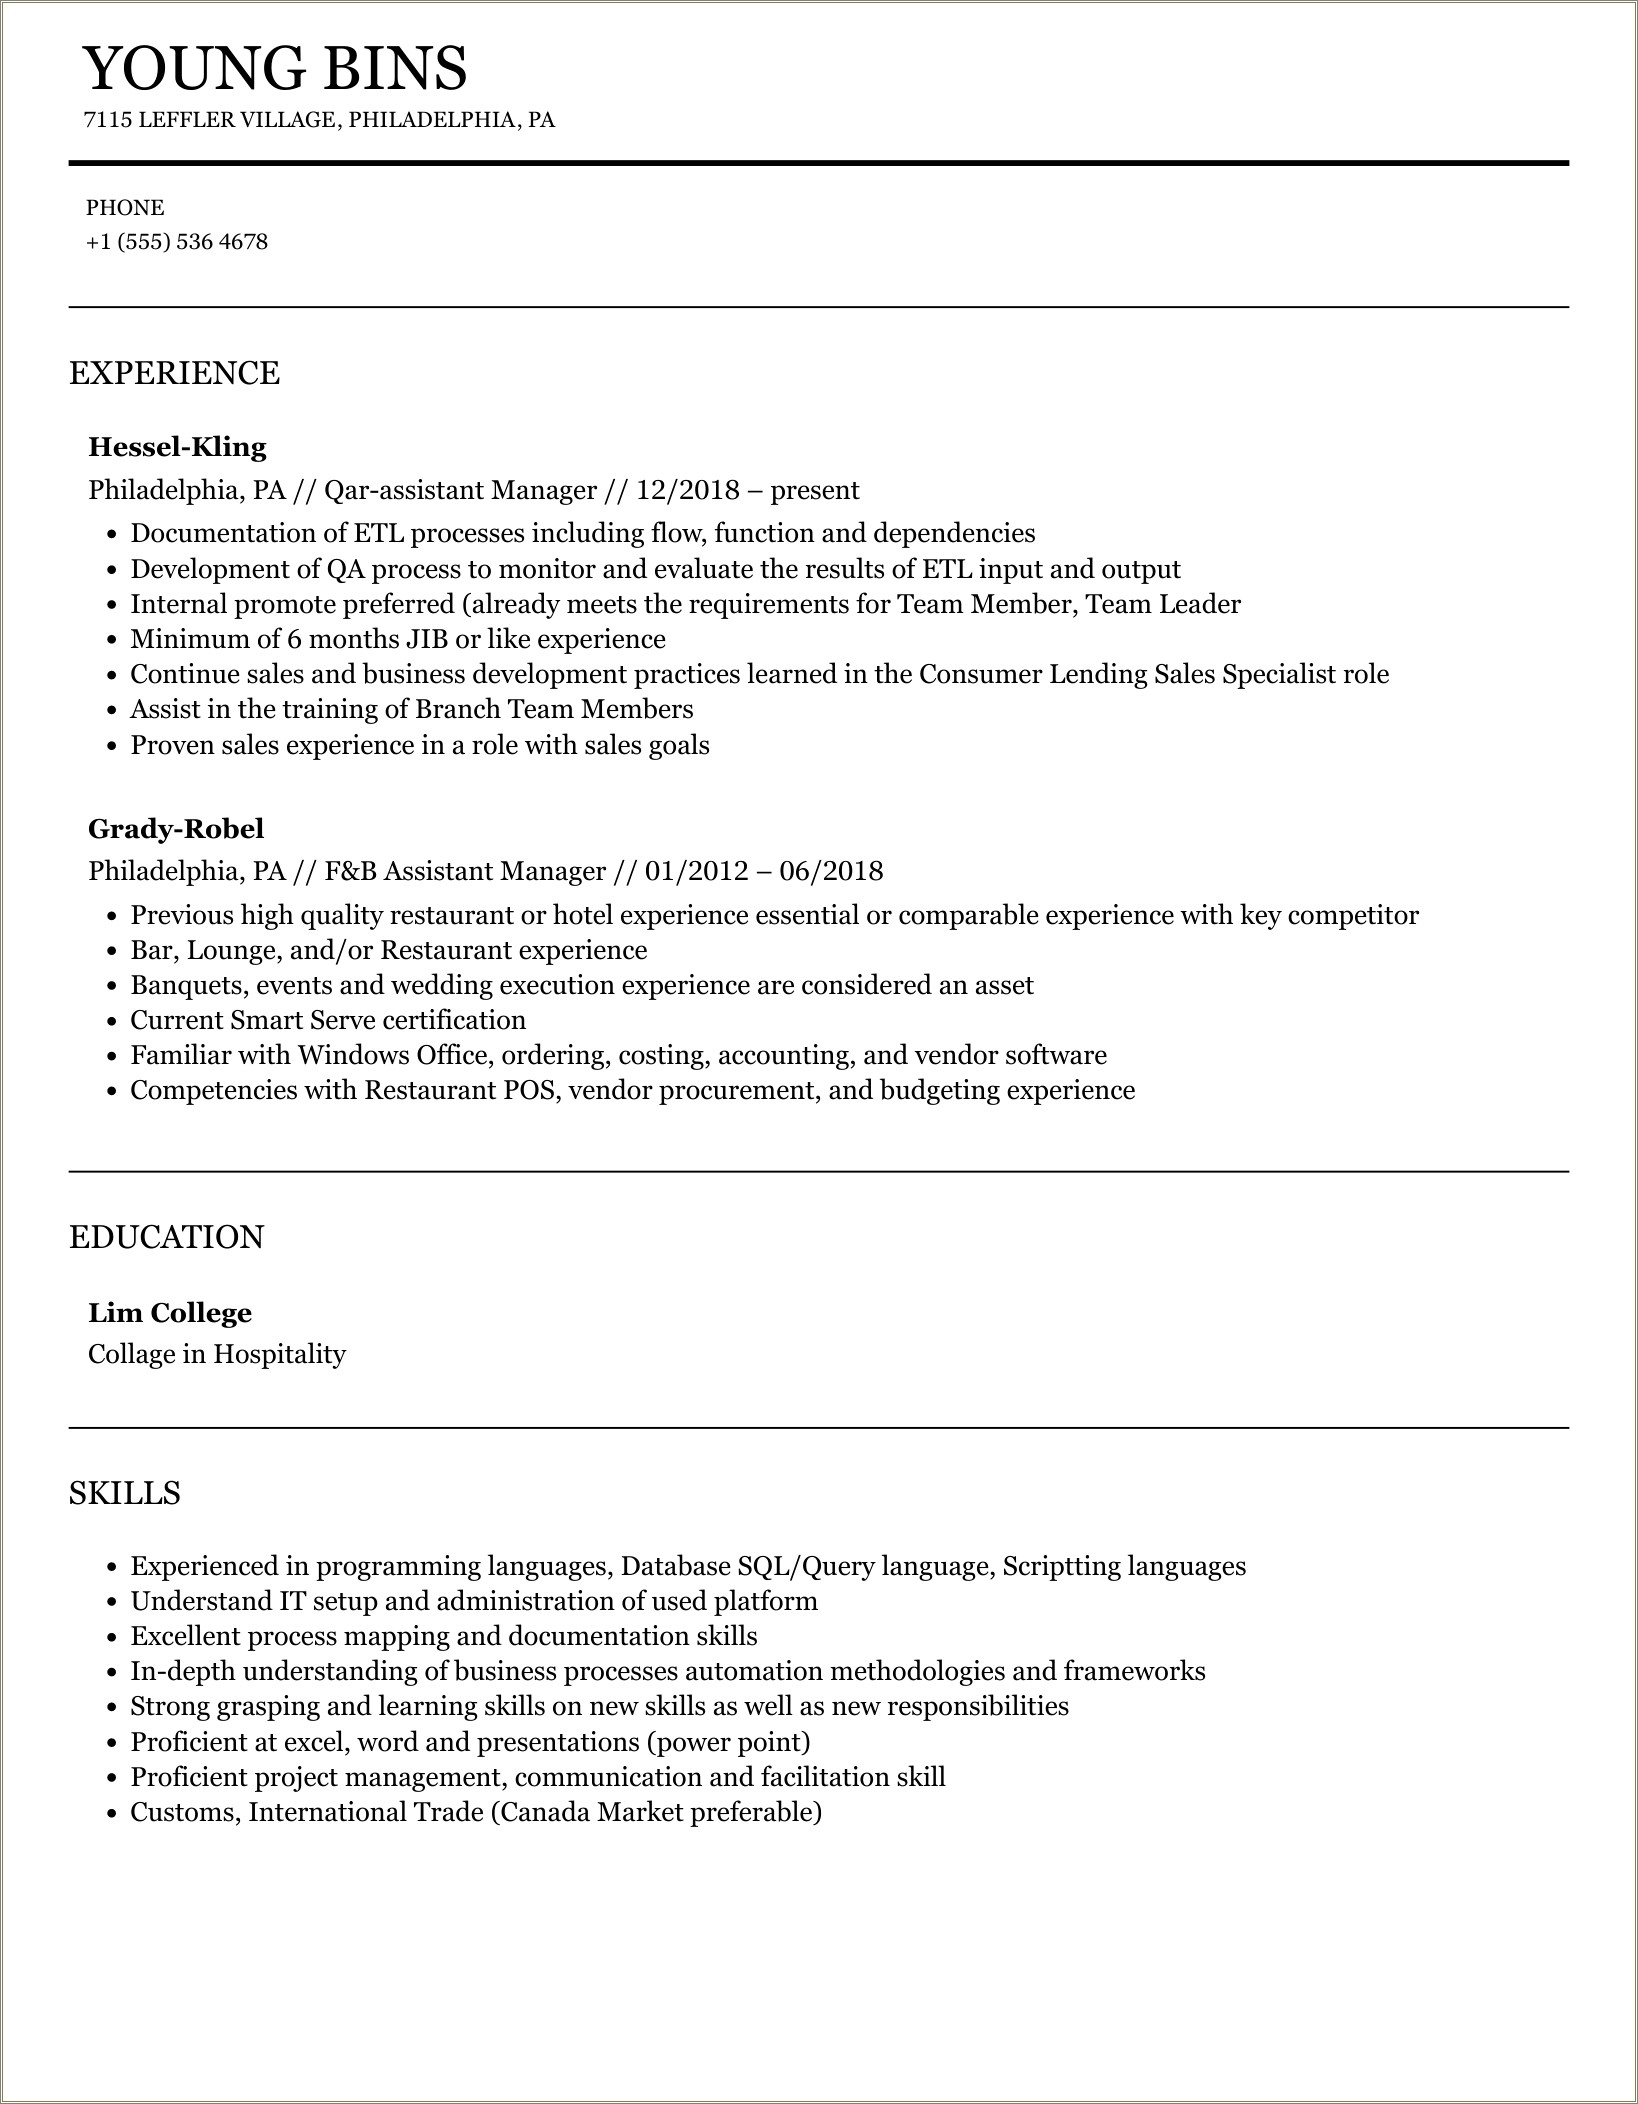 Holiday Inn Express Assistant Manager Resume